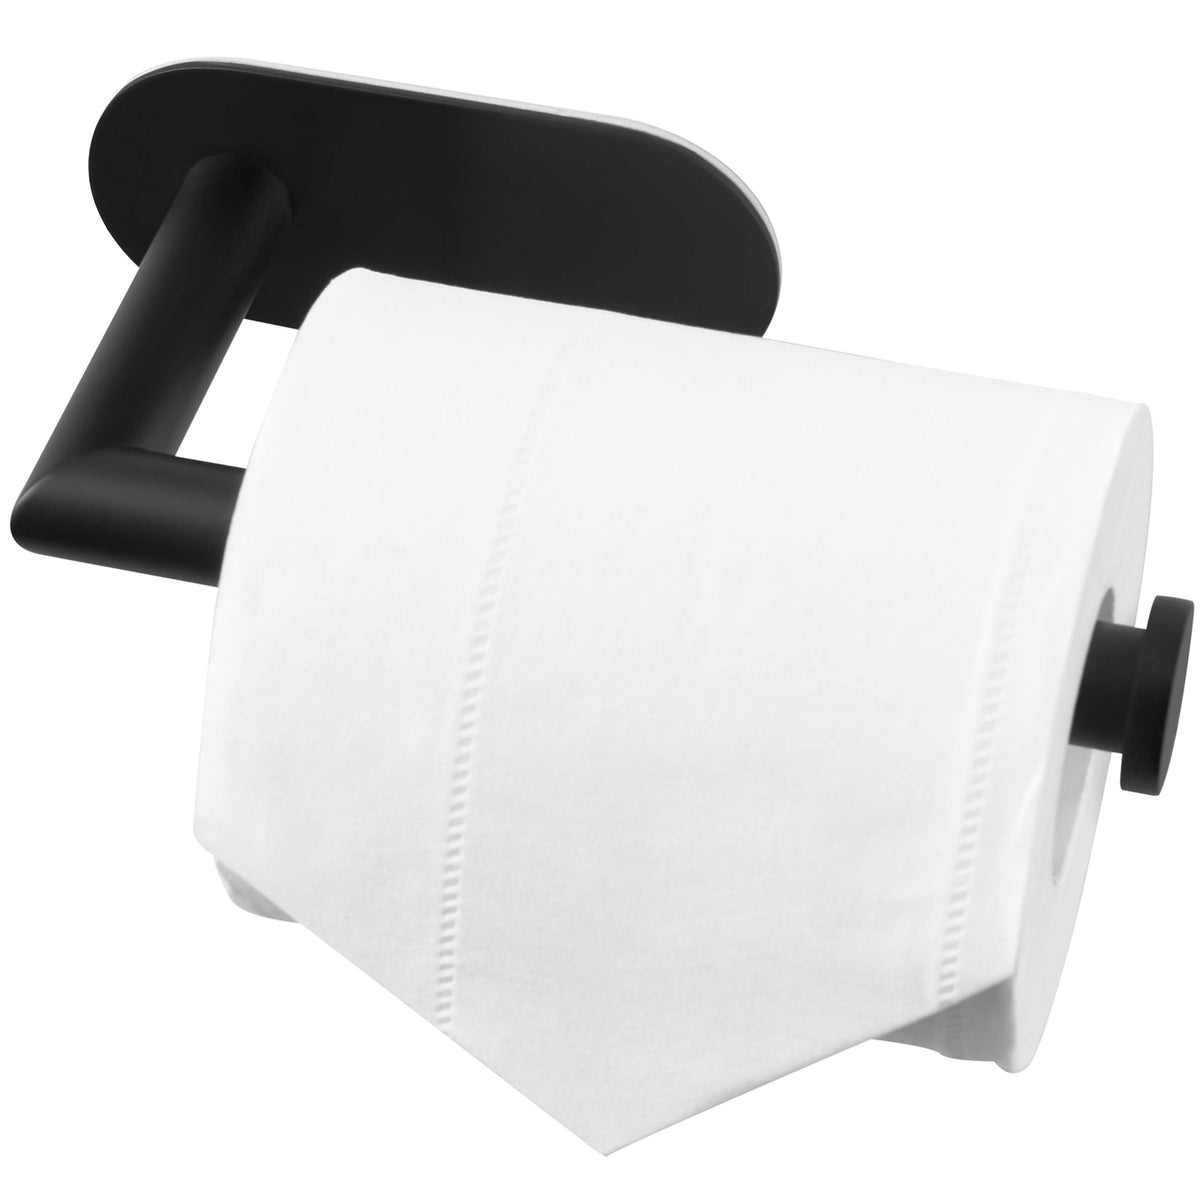 Henitol Toilet Paper Holder with Shelf, Rustproof SUS304 Stainless Steel  Black Toilet Paper Holder, Self Adhesive Stick on No Drill or Wall-Mount  with